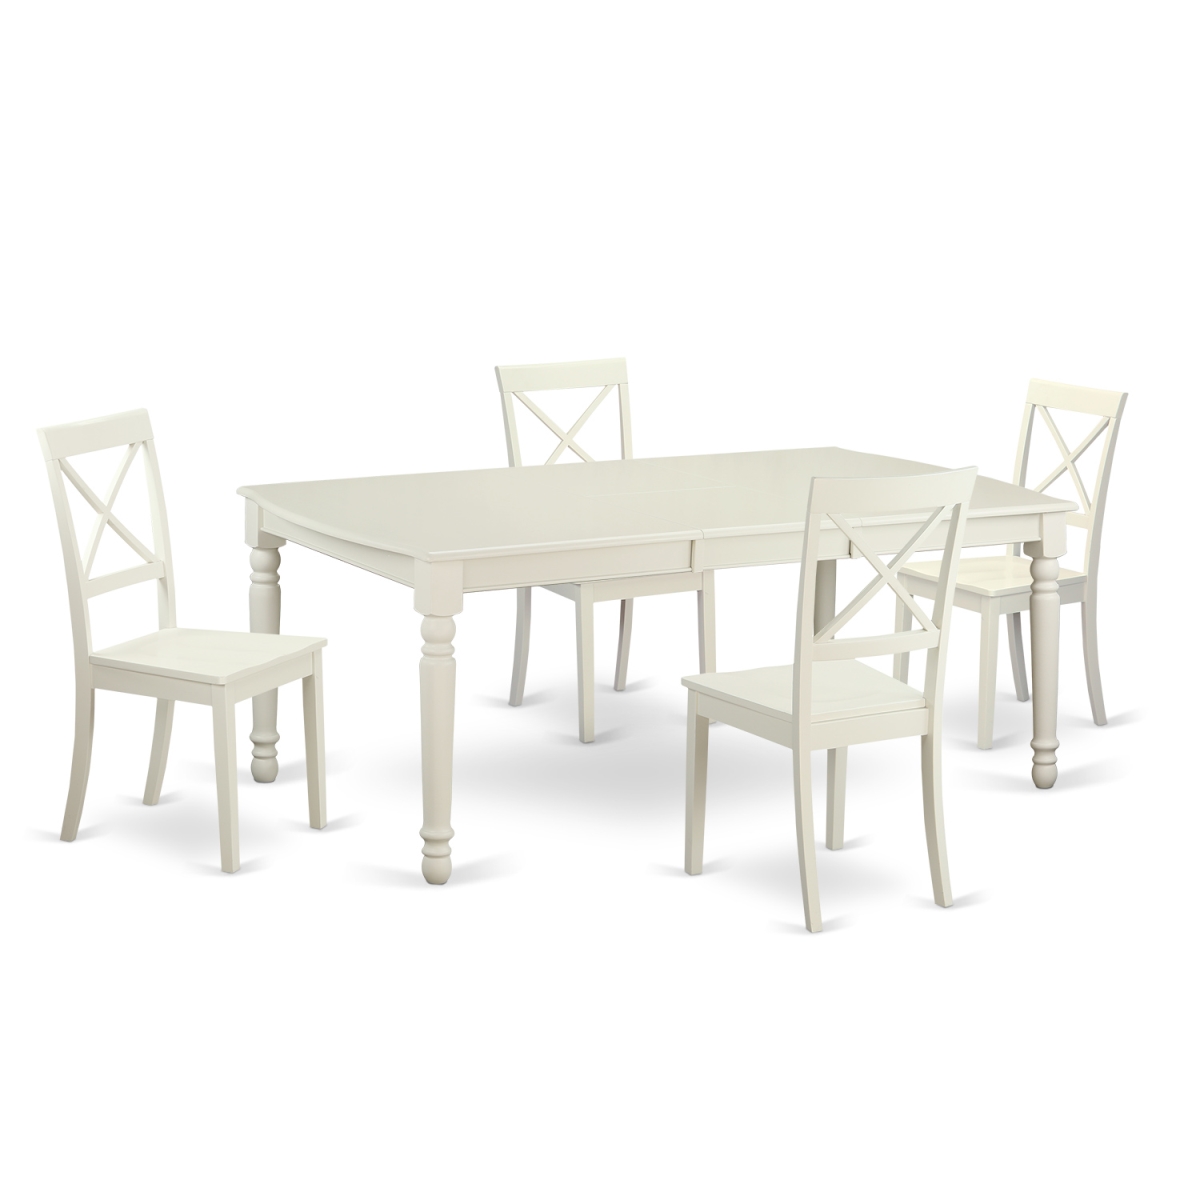 Picture of East West Furniture DOBO5-LWH-W Dinette Set - Kitchen Table & 4 Chairs, Linen White - 5 Piece